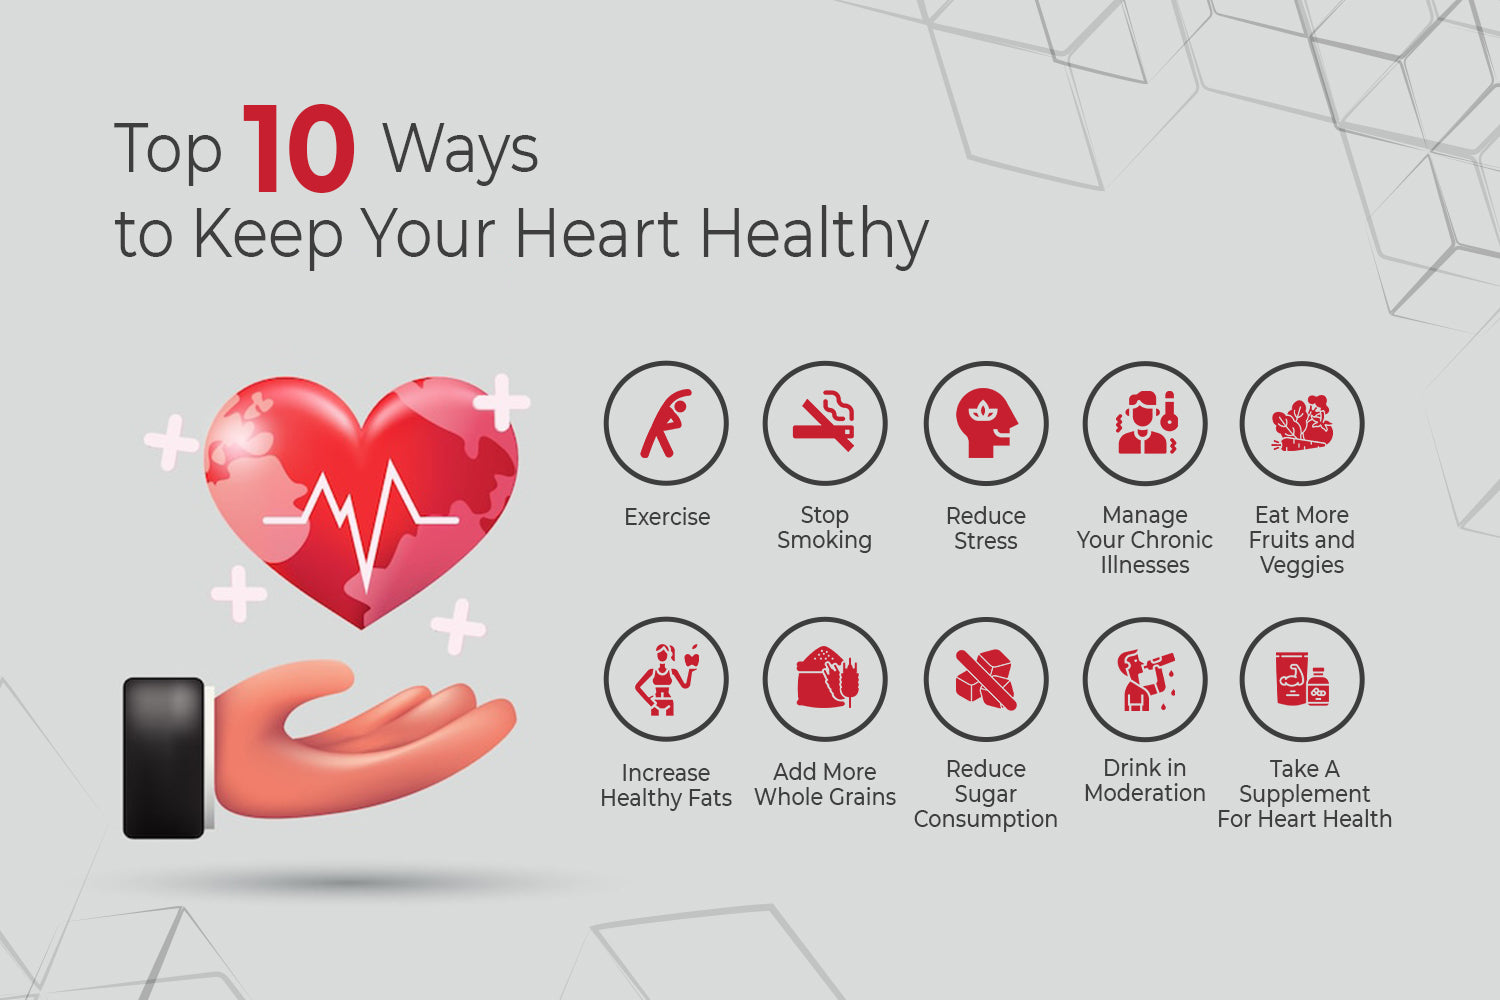 Top 10 Ways to Keep Your Heart Healthy